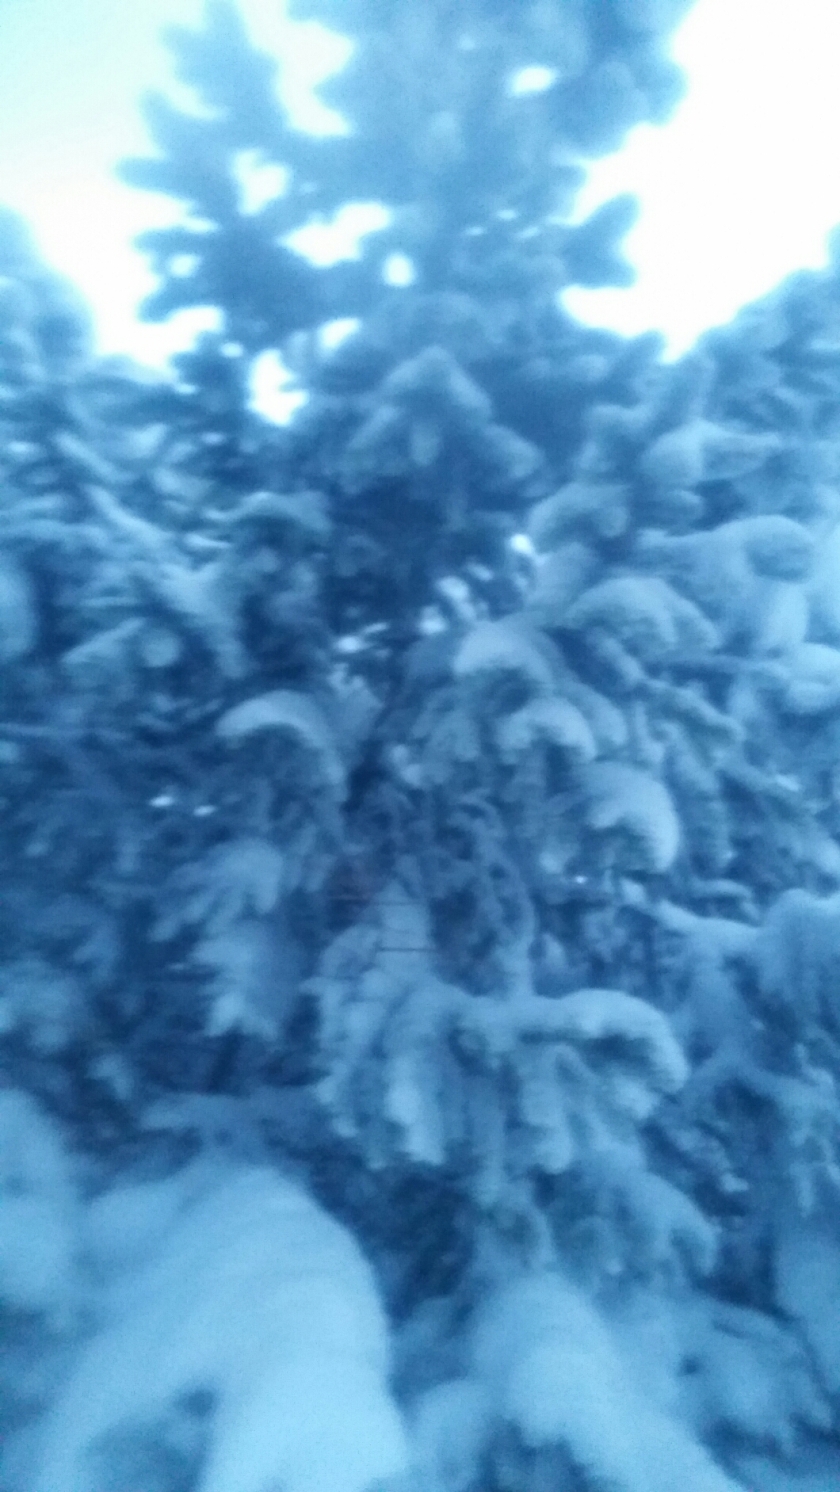 Pine tree covered in snow